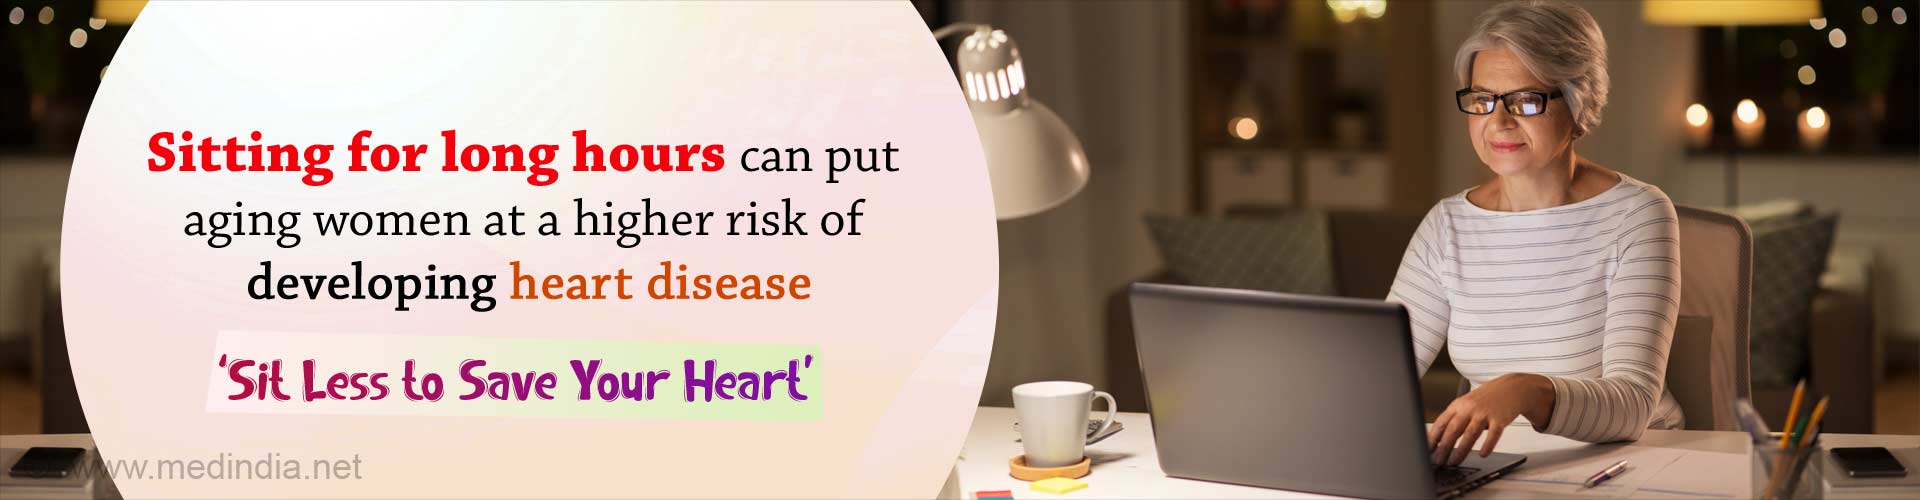 Sitting for long hours can put aging women at a higher risk of developing heart disease. Sit Less to Save Your Heart.